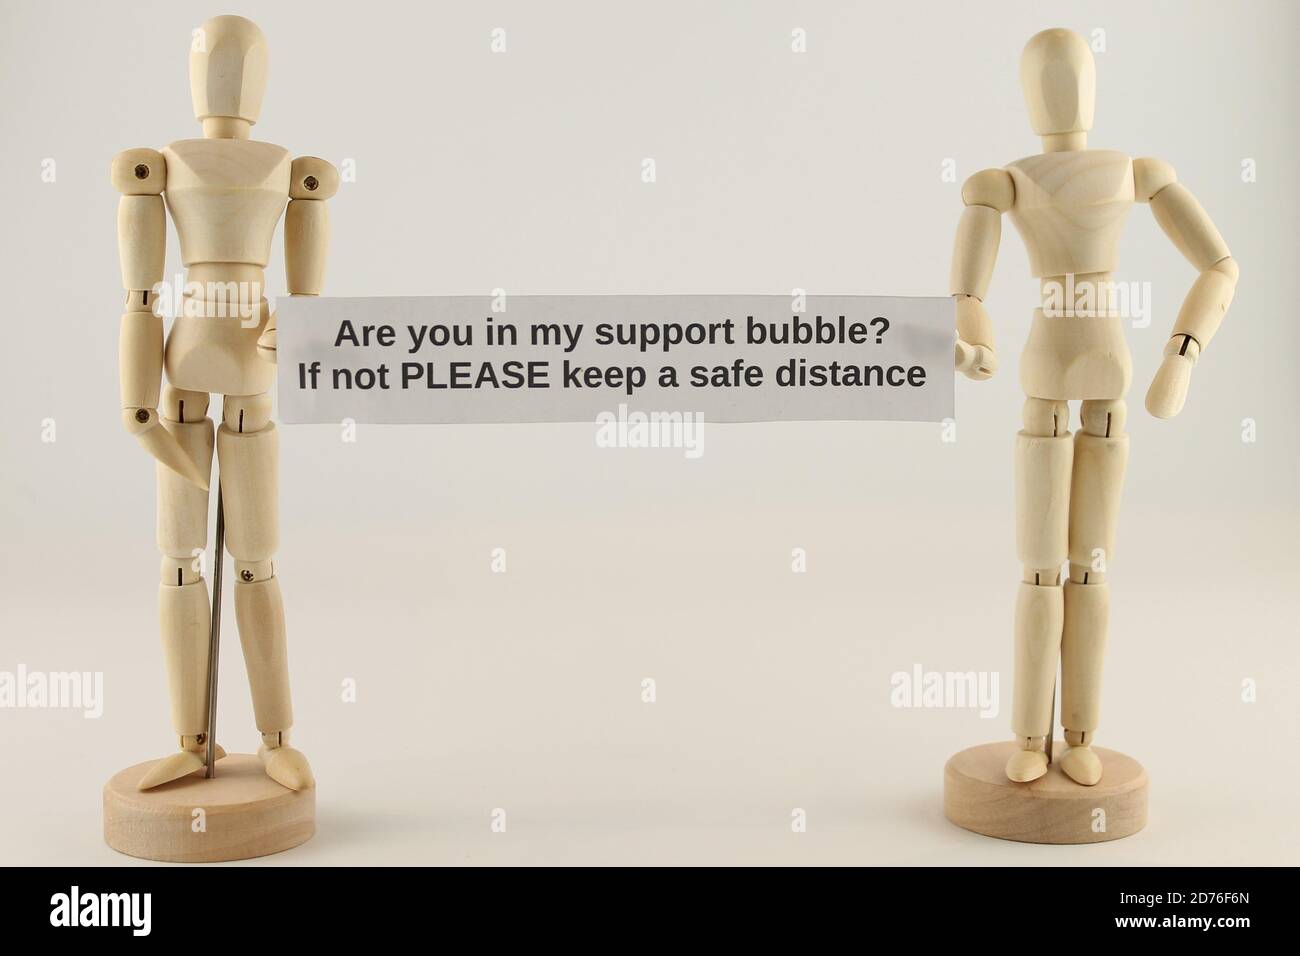 Are you in my support bubble, if not please keep a safe distance sign held by two manikins Stock Photo